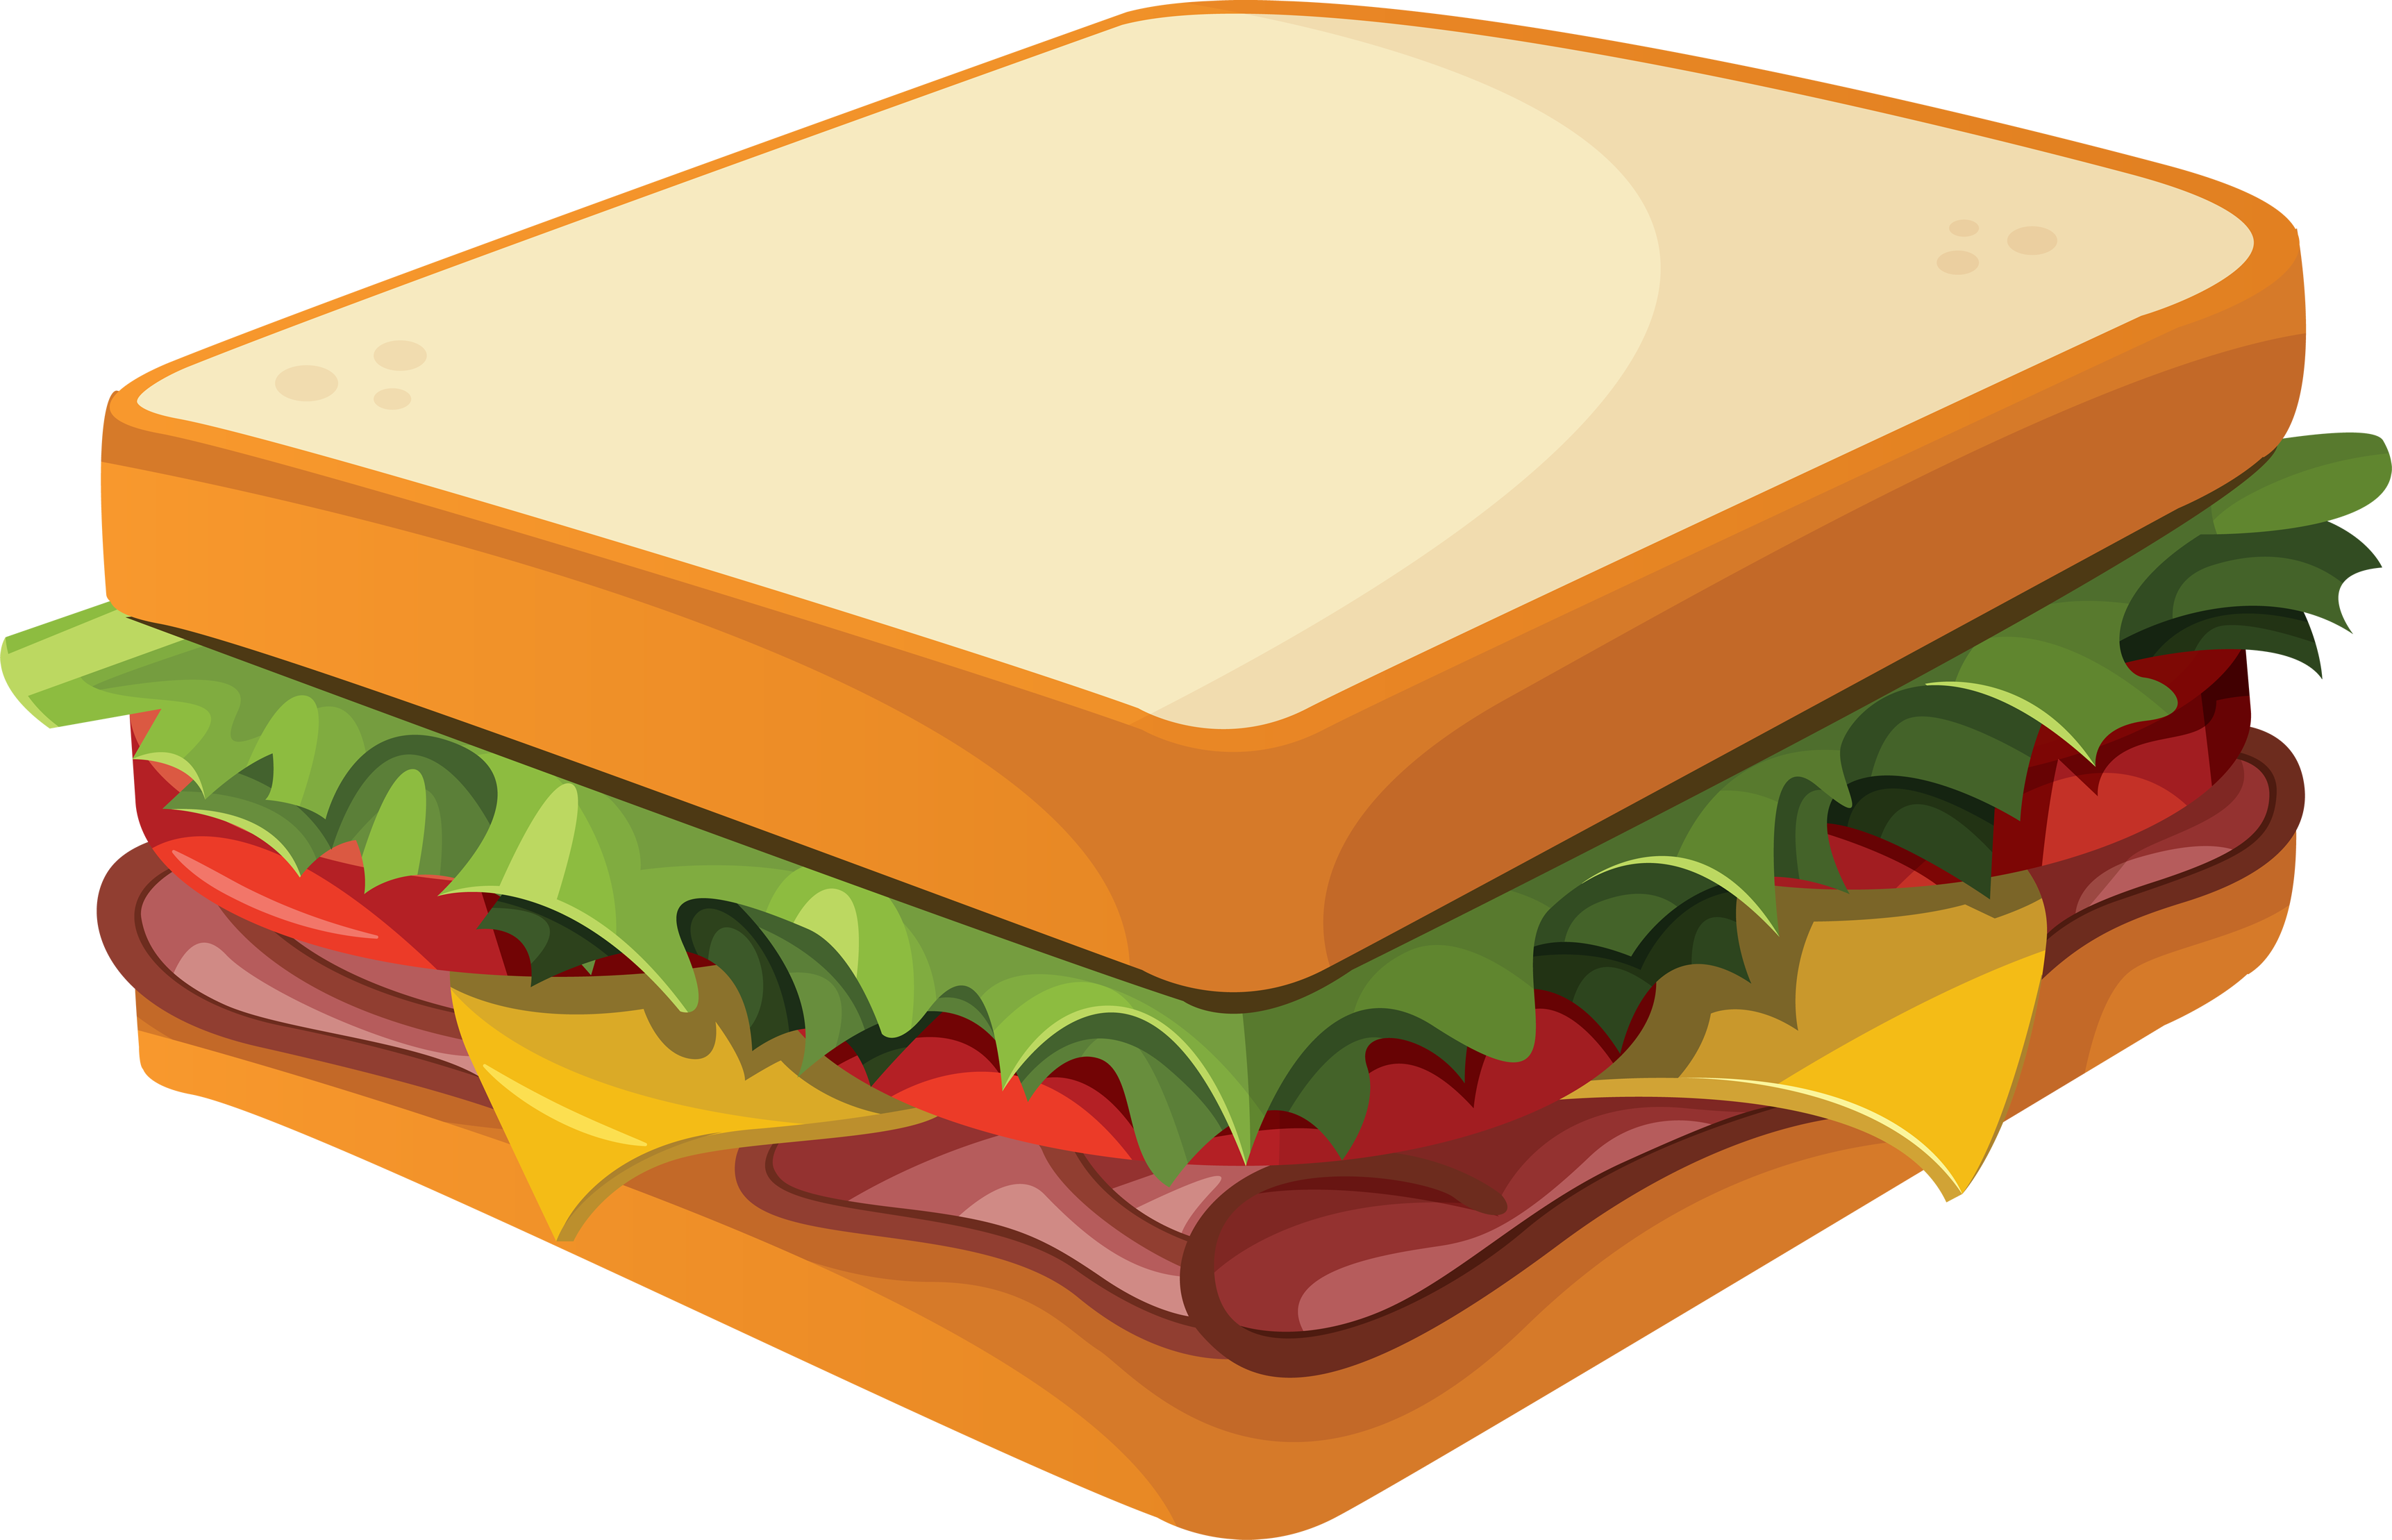 Tasty Sandwich drawing free image download